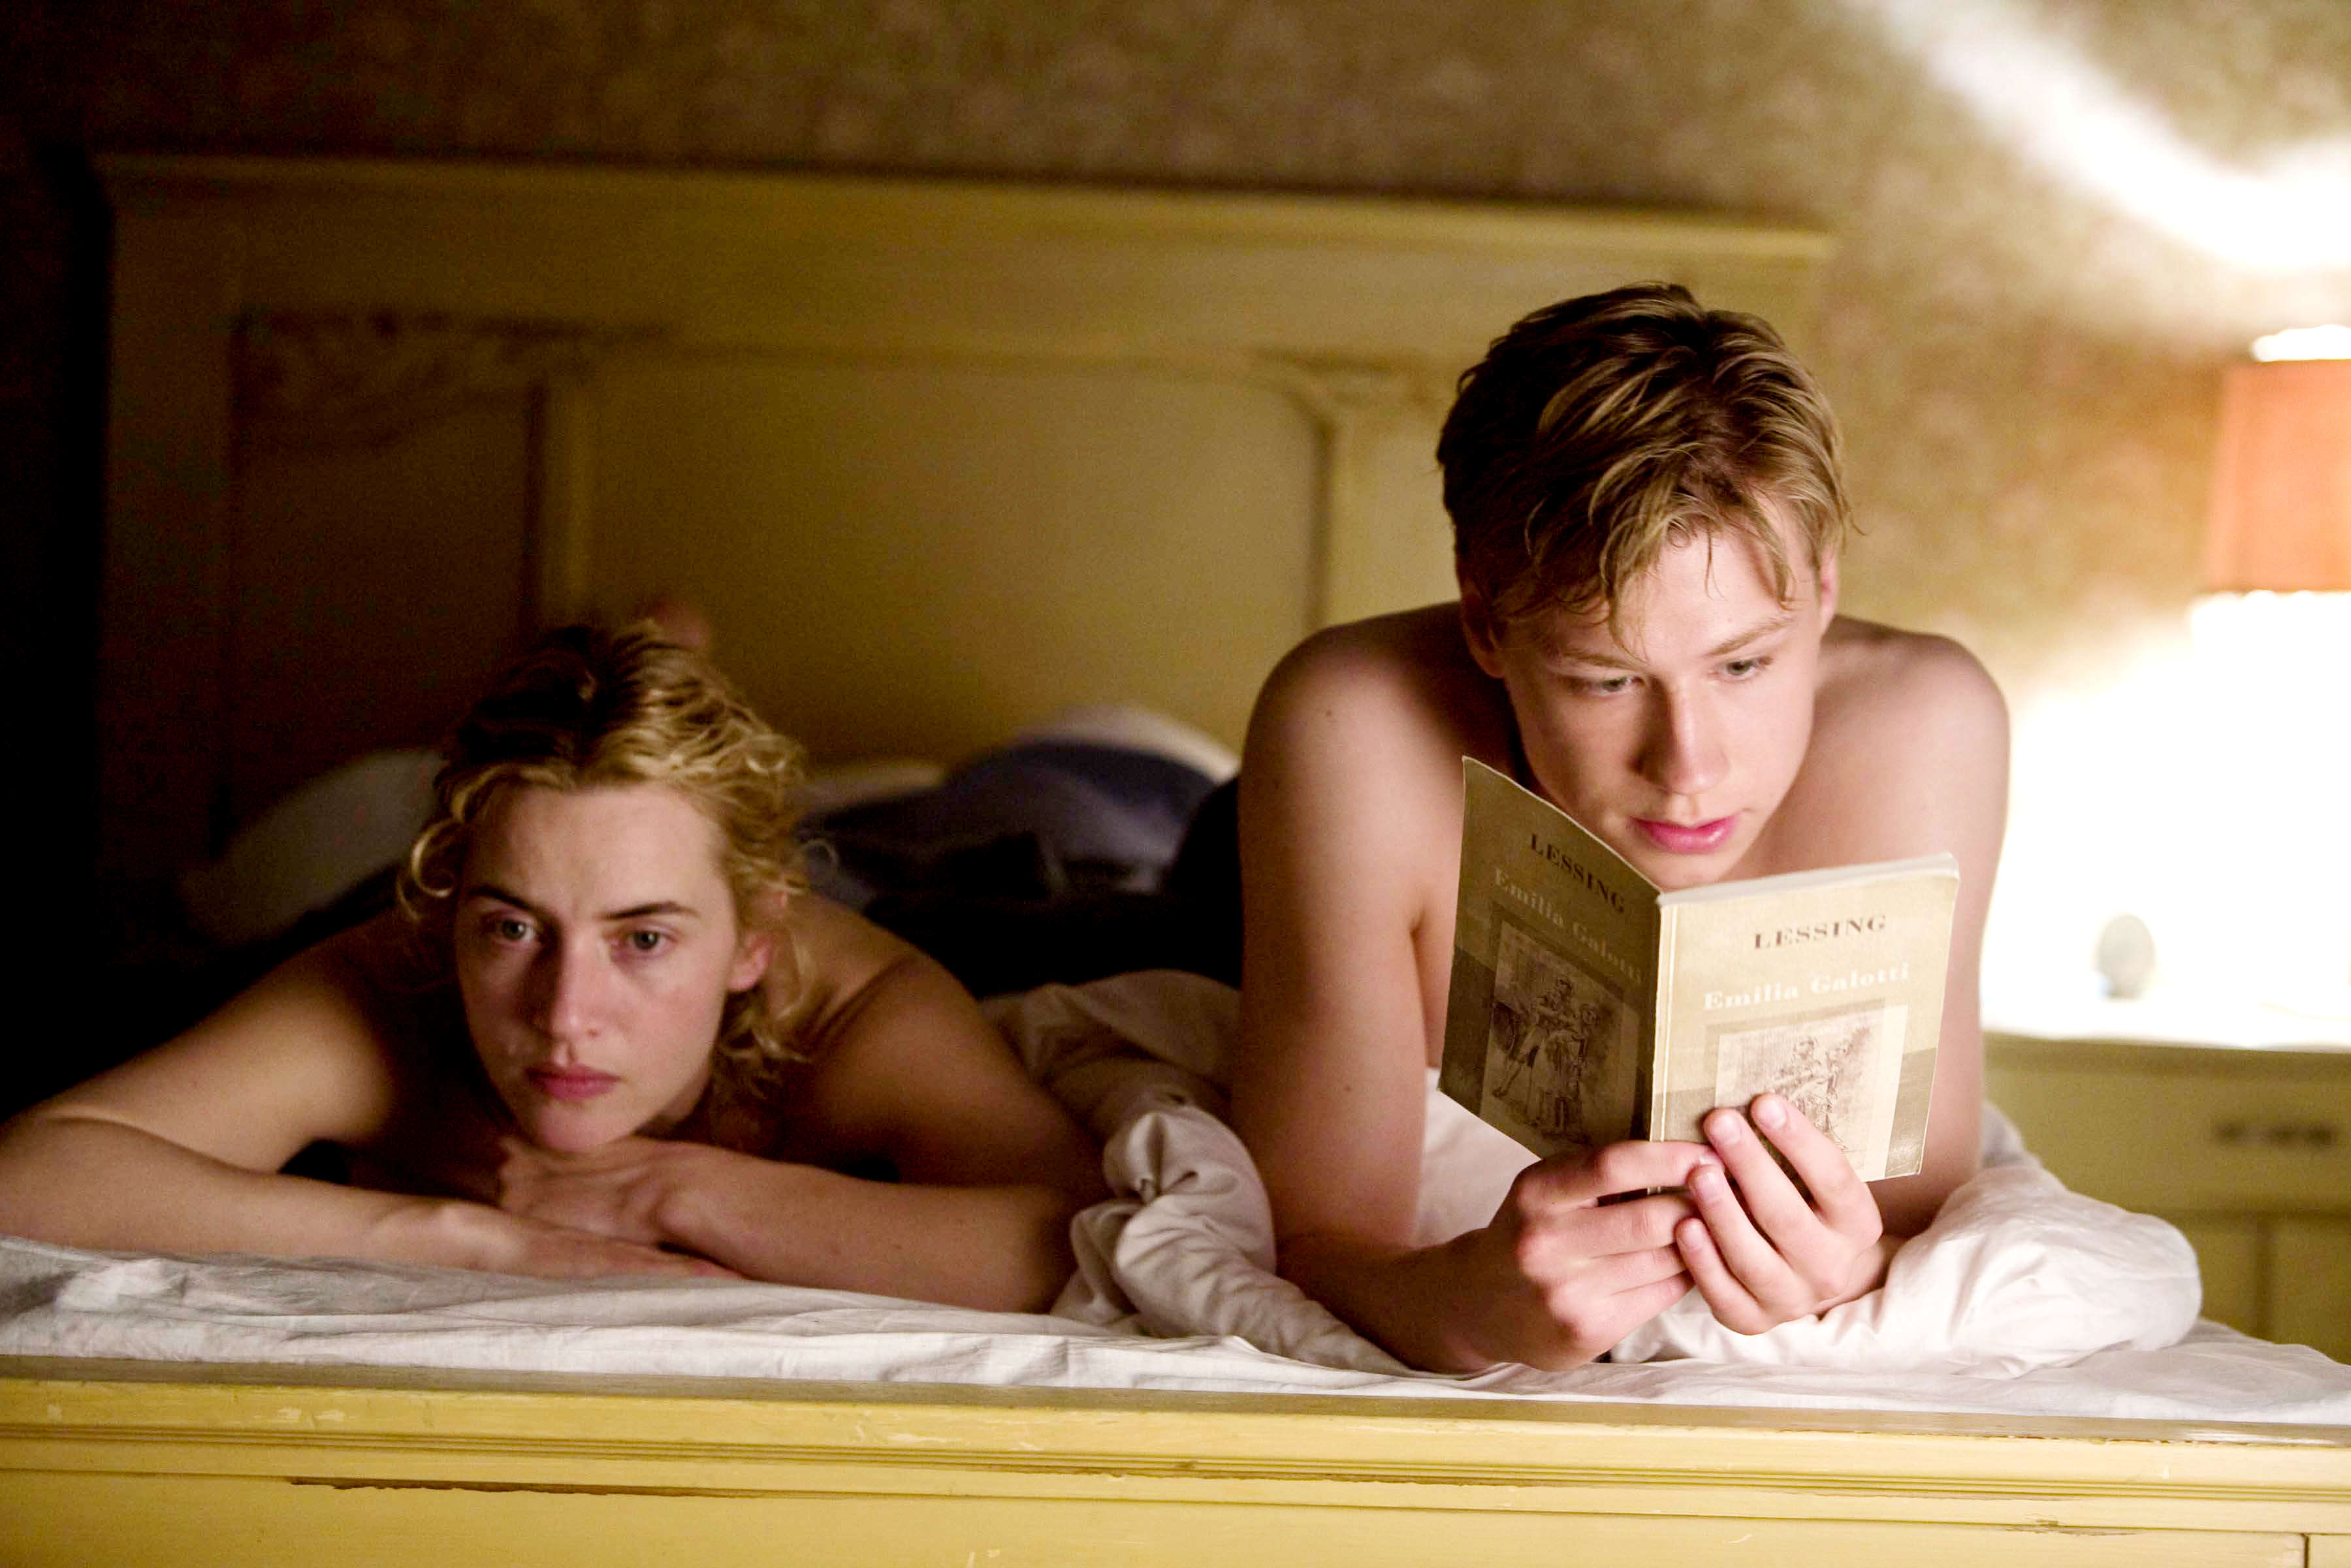 Kate Winslet stars as Hanna Schmitz and David Kross stars as Michael in The Weinstein Company's The Reader (2009). Photo credit by Melinda Sue Gordon.